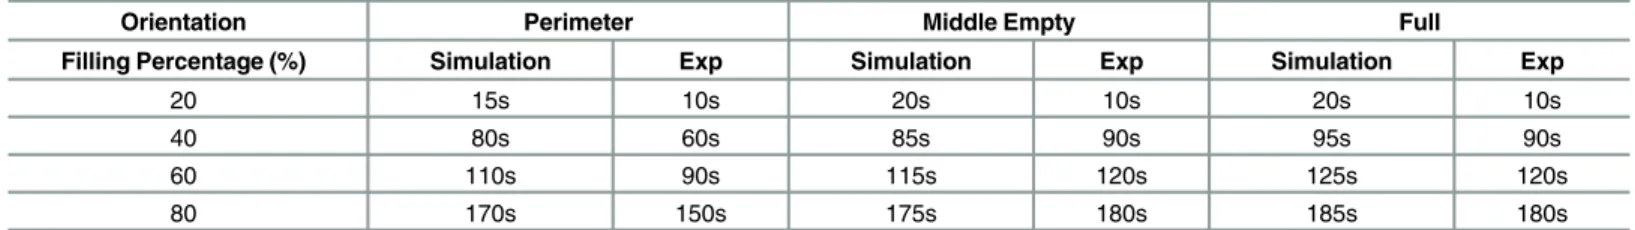 Table 4. Data from comparison between simulation and experiment (perimeter, middle empty and full).